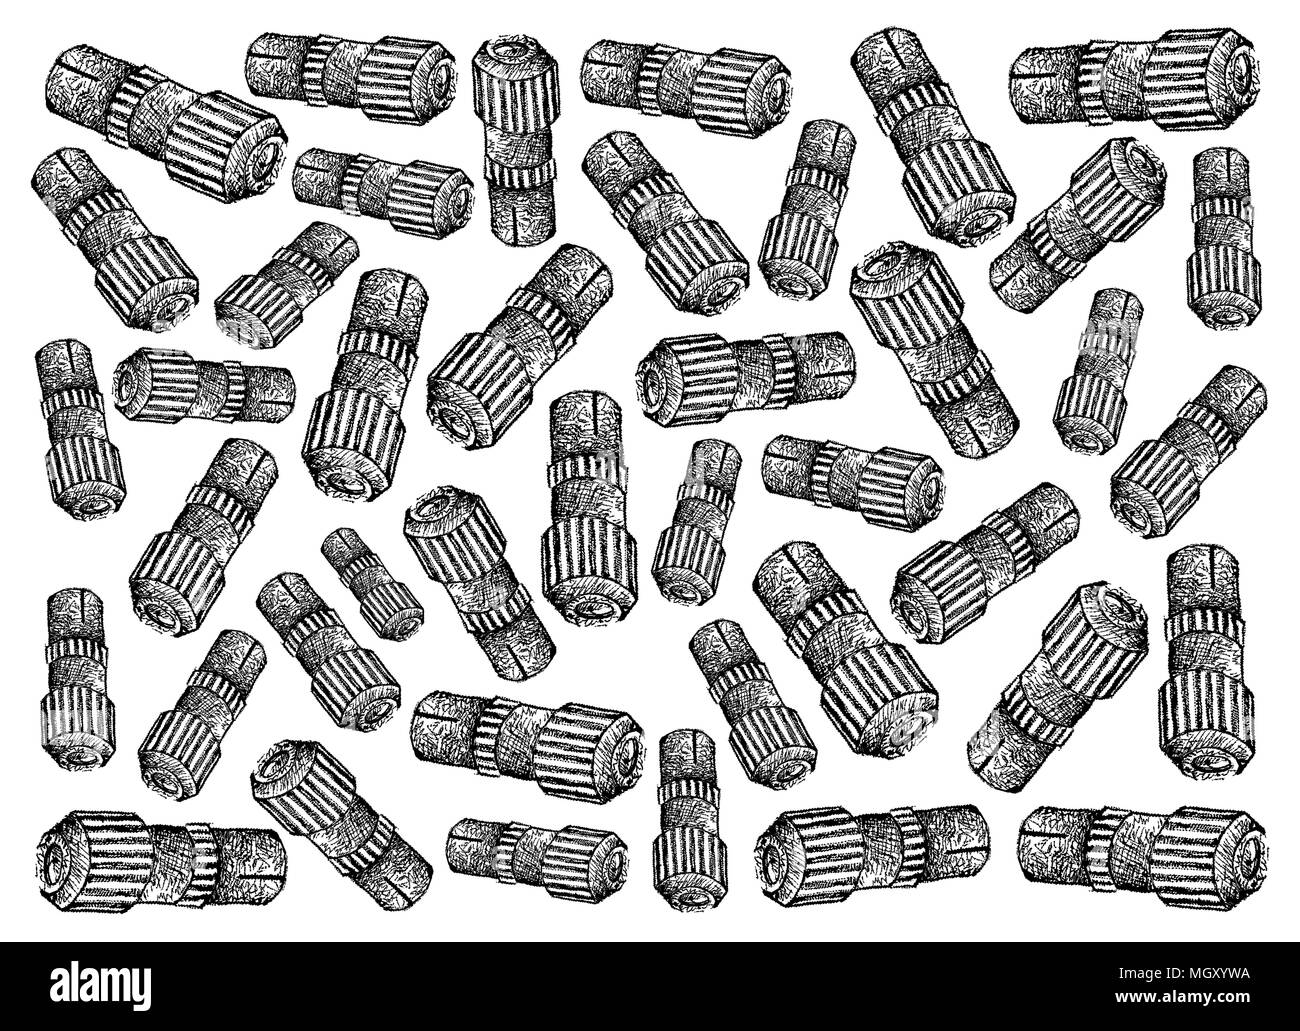 Illustration Wallpaper Background of Hand Drawn Sketch of TV Aerial Plugs or Professional Coaxial Cable Television Connectors, Used to Connect Coaxial Stock Photo